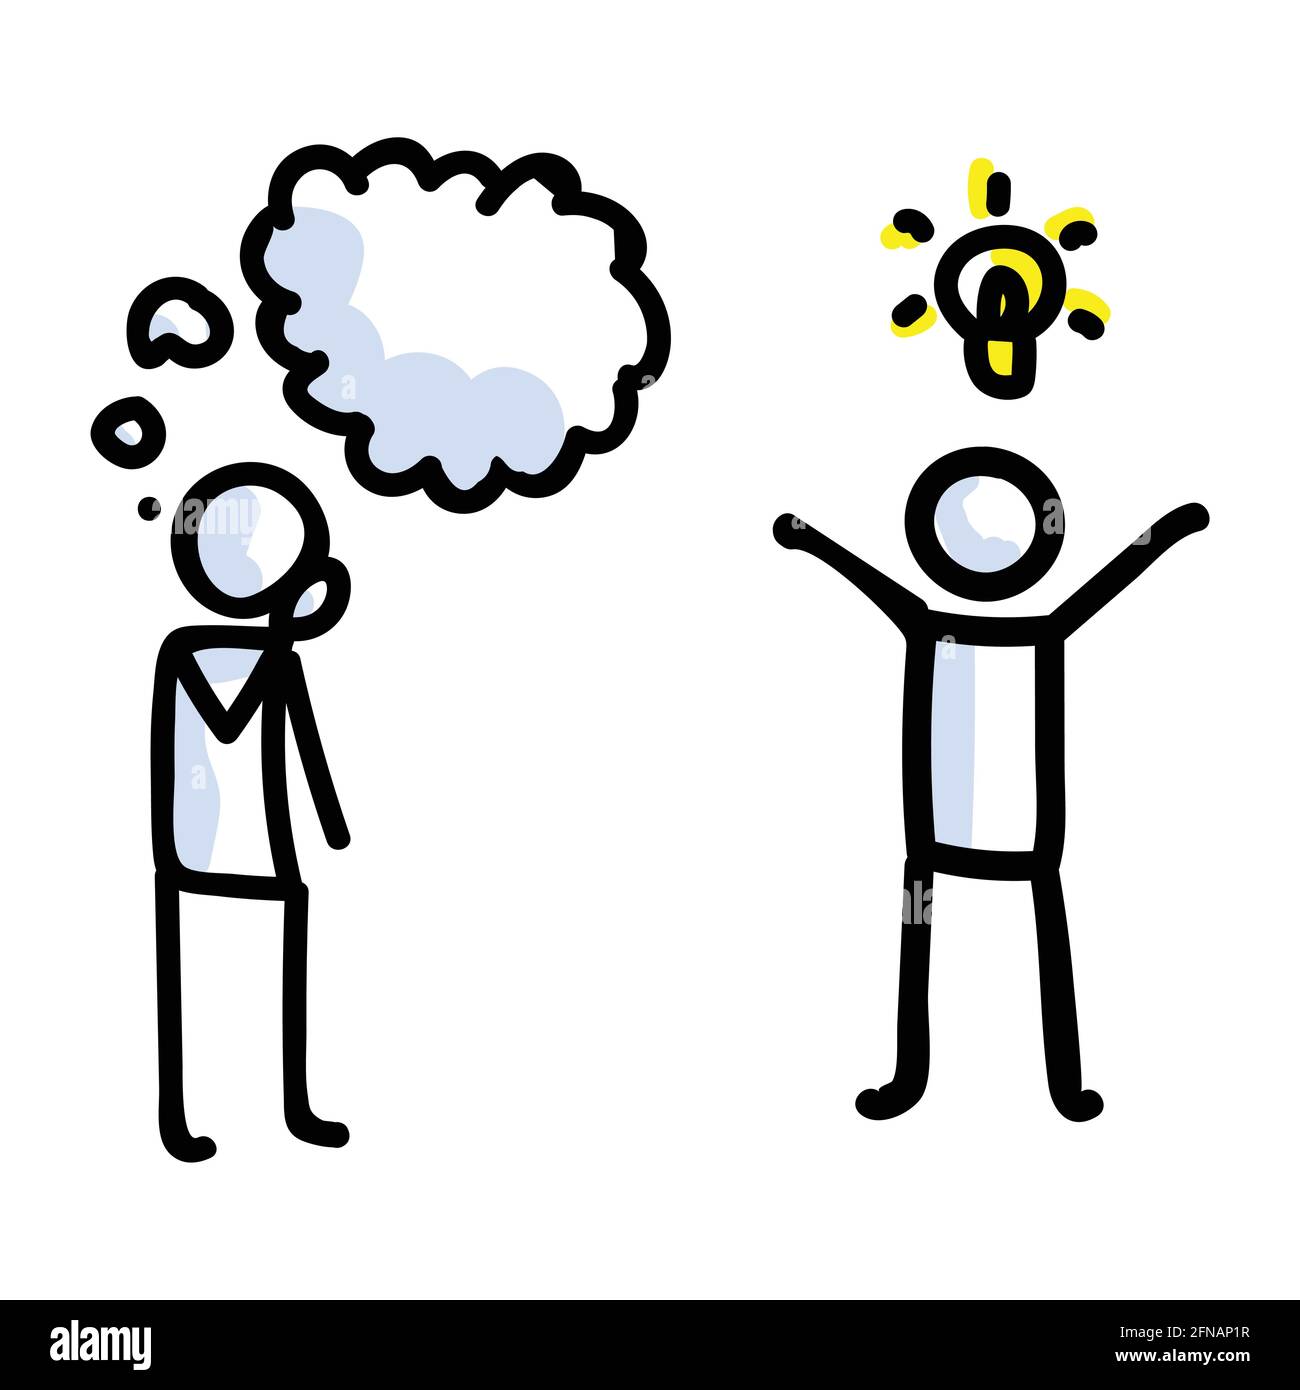 Hand Drawn Thinking Stick Figure with Idea. Concept of Inspiration Lightbulb Thought Expression. Simple Icon Motif for Brainstorming Speech Bubble Stock Vector